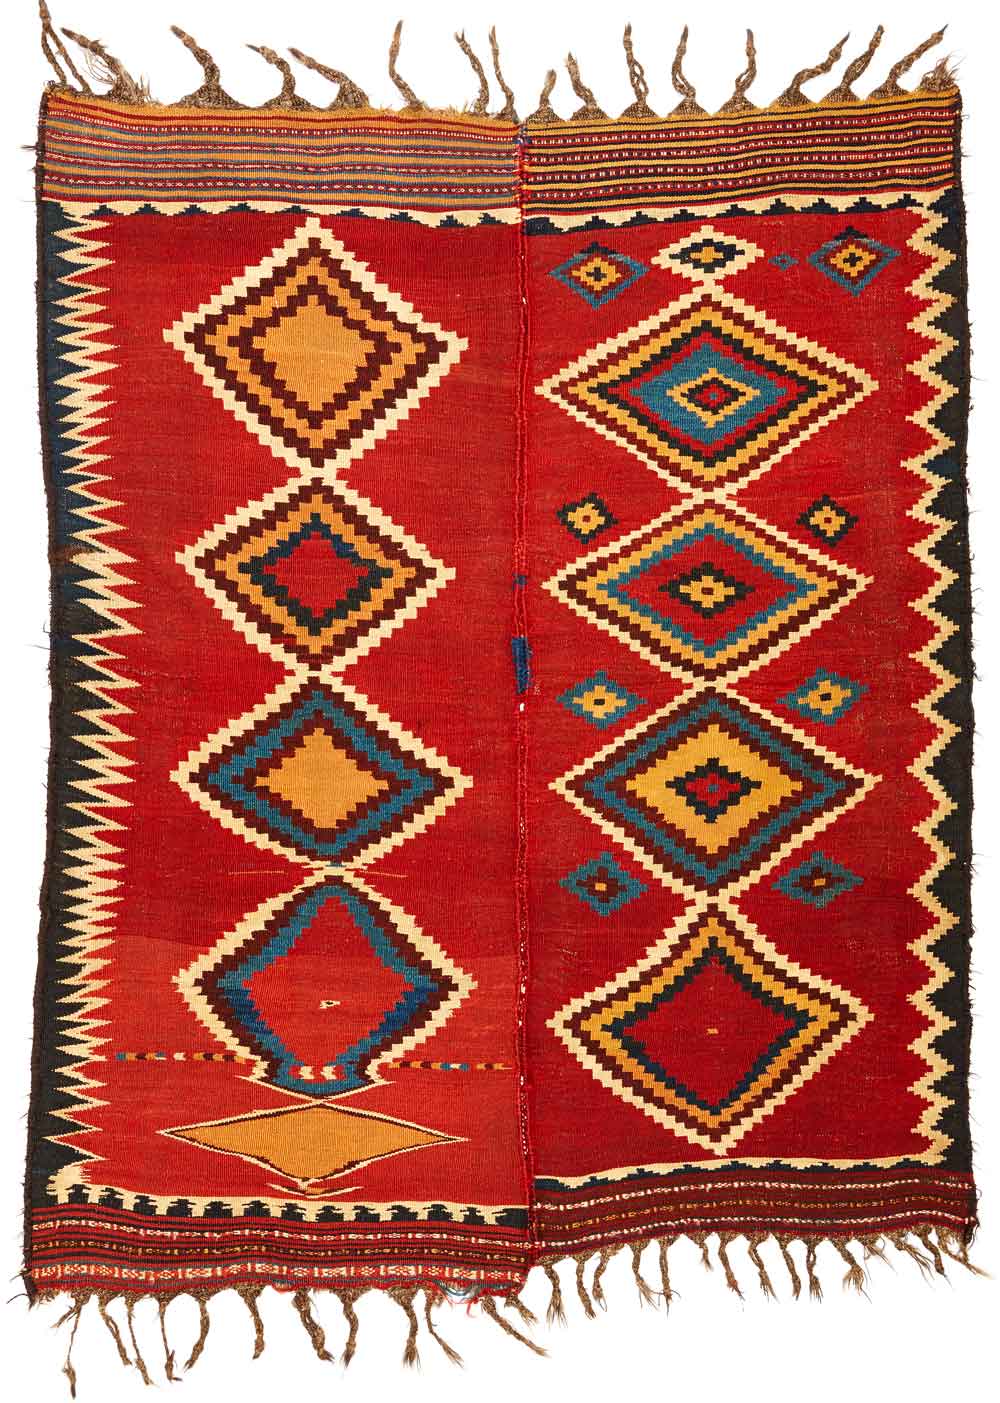 Kilim (made from two parts), late 19th century South-Persia, Kohgilujeh Luri tribes 172 x 214 cm Neiriz Collection on view in 100 Kilims at Halle 